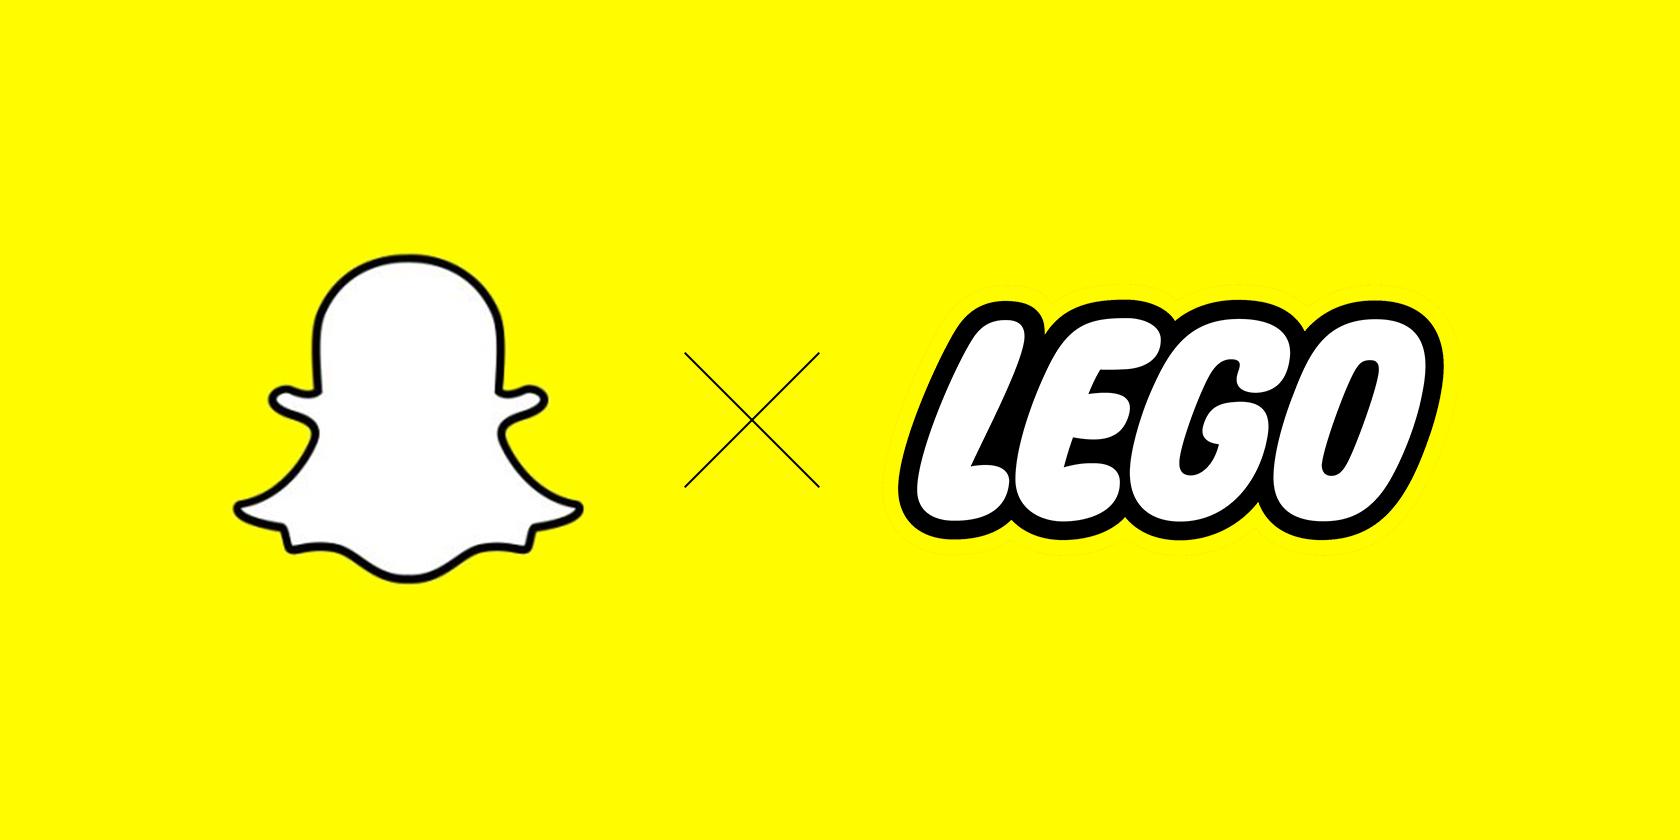 Snapchat and Lego collaboration